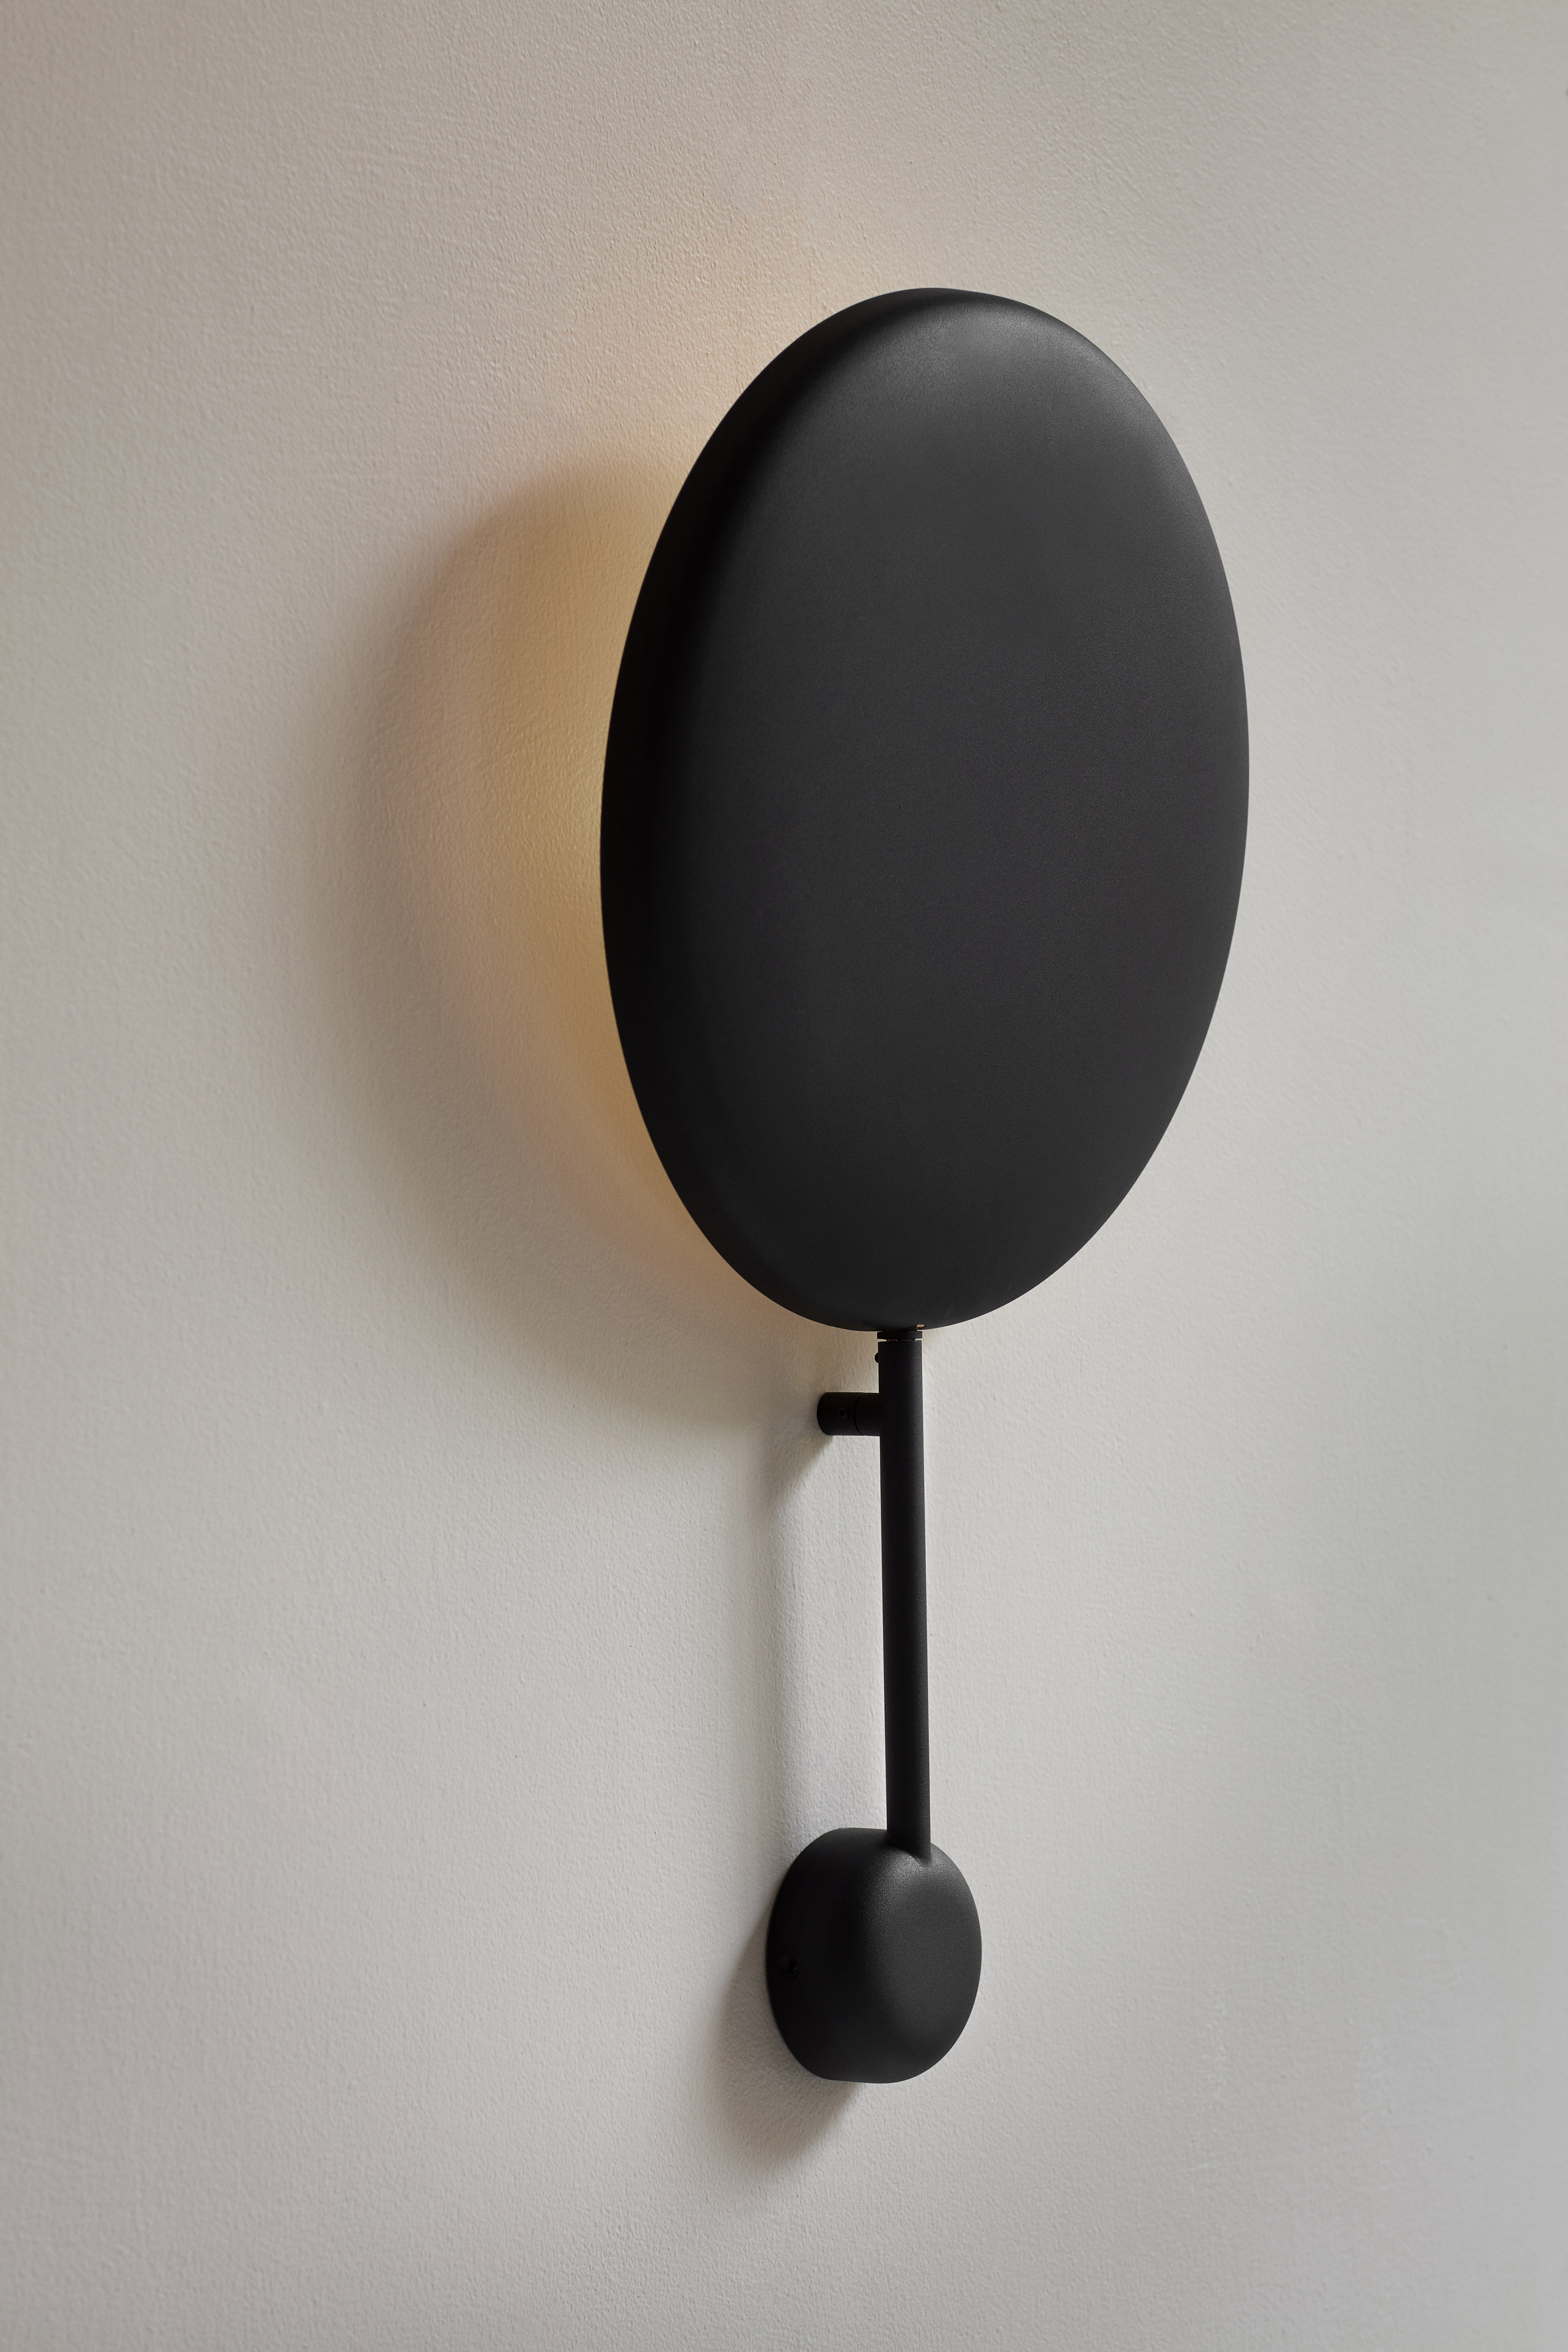 The Ink wall lamp features a concave disc-shaped body with a matt black finish